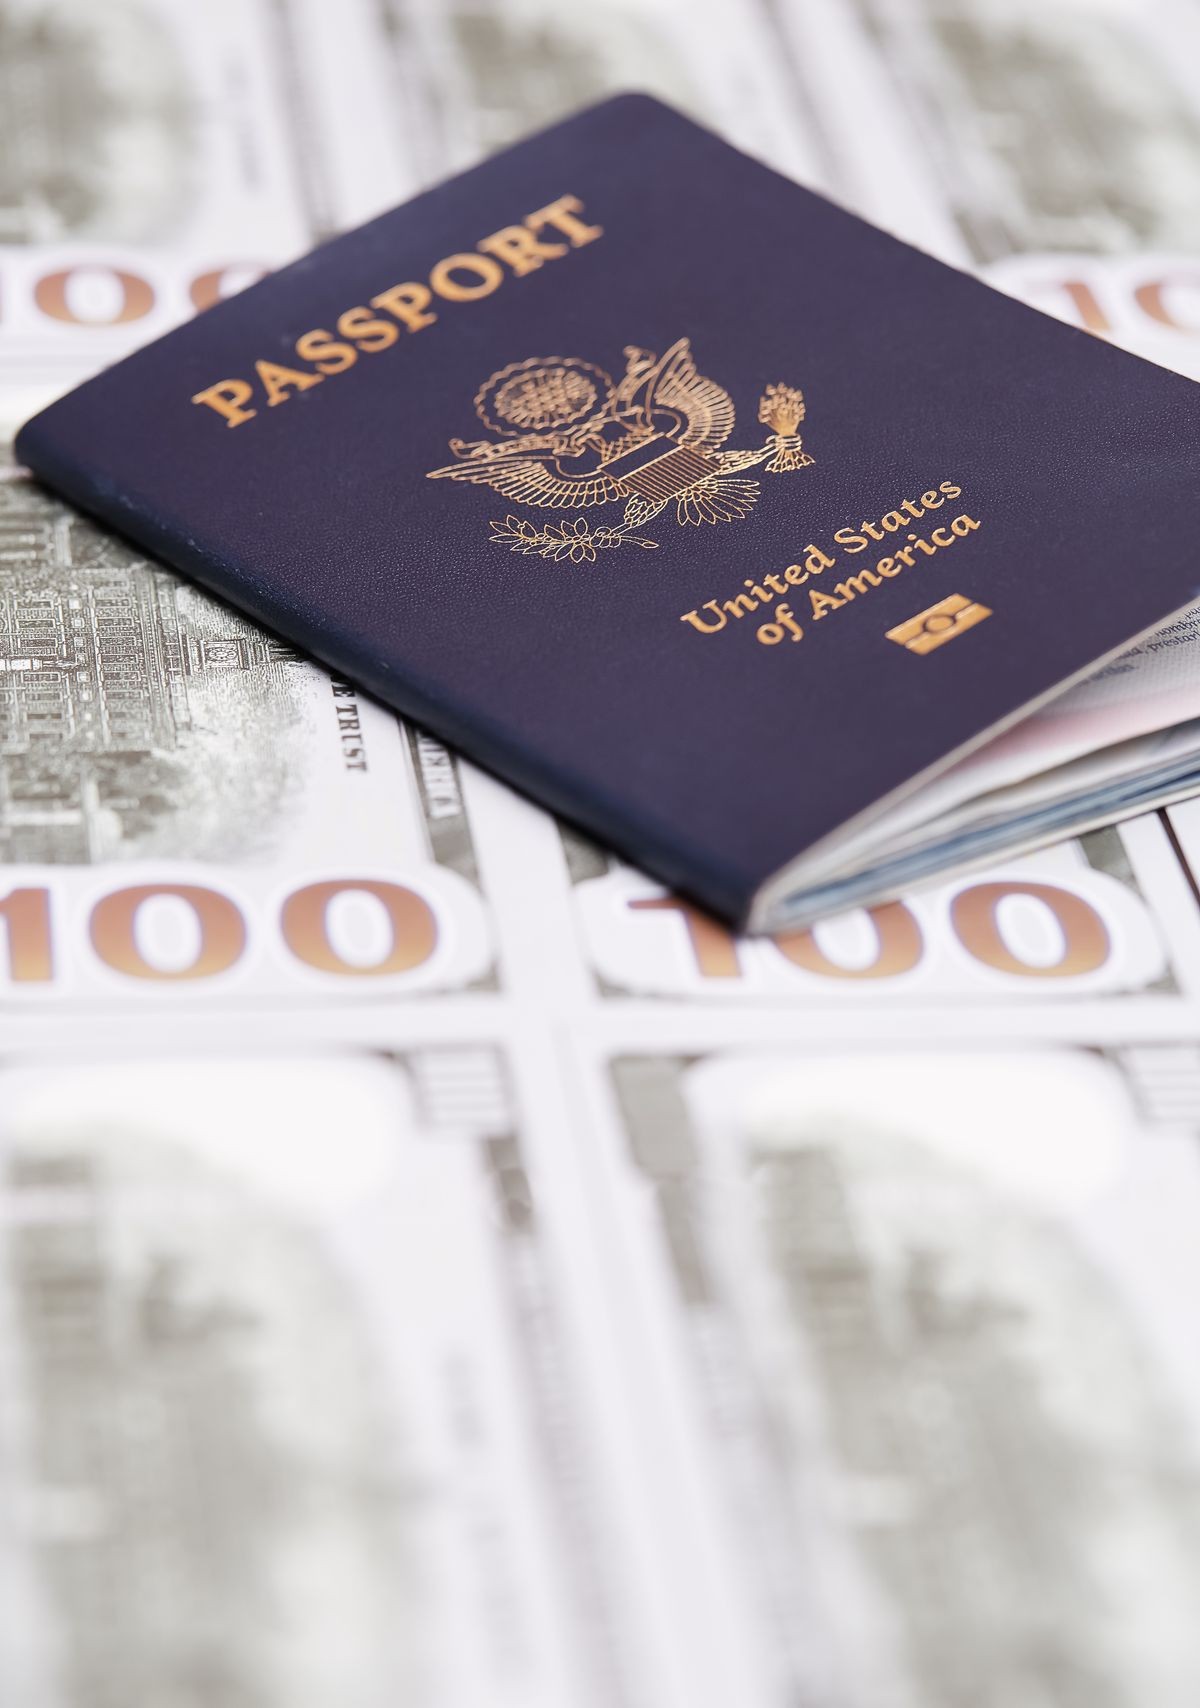 us passport and dollars banknotes. money and travel concept.